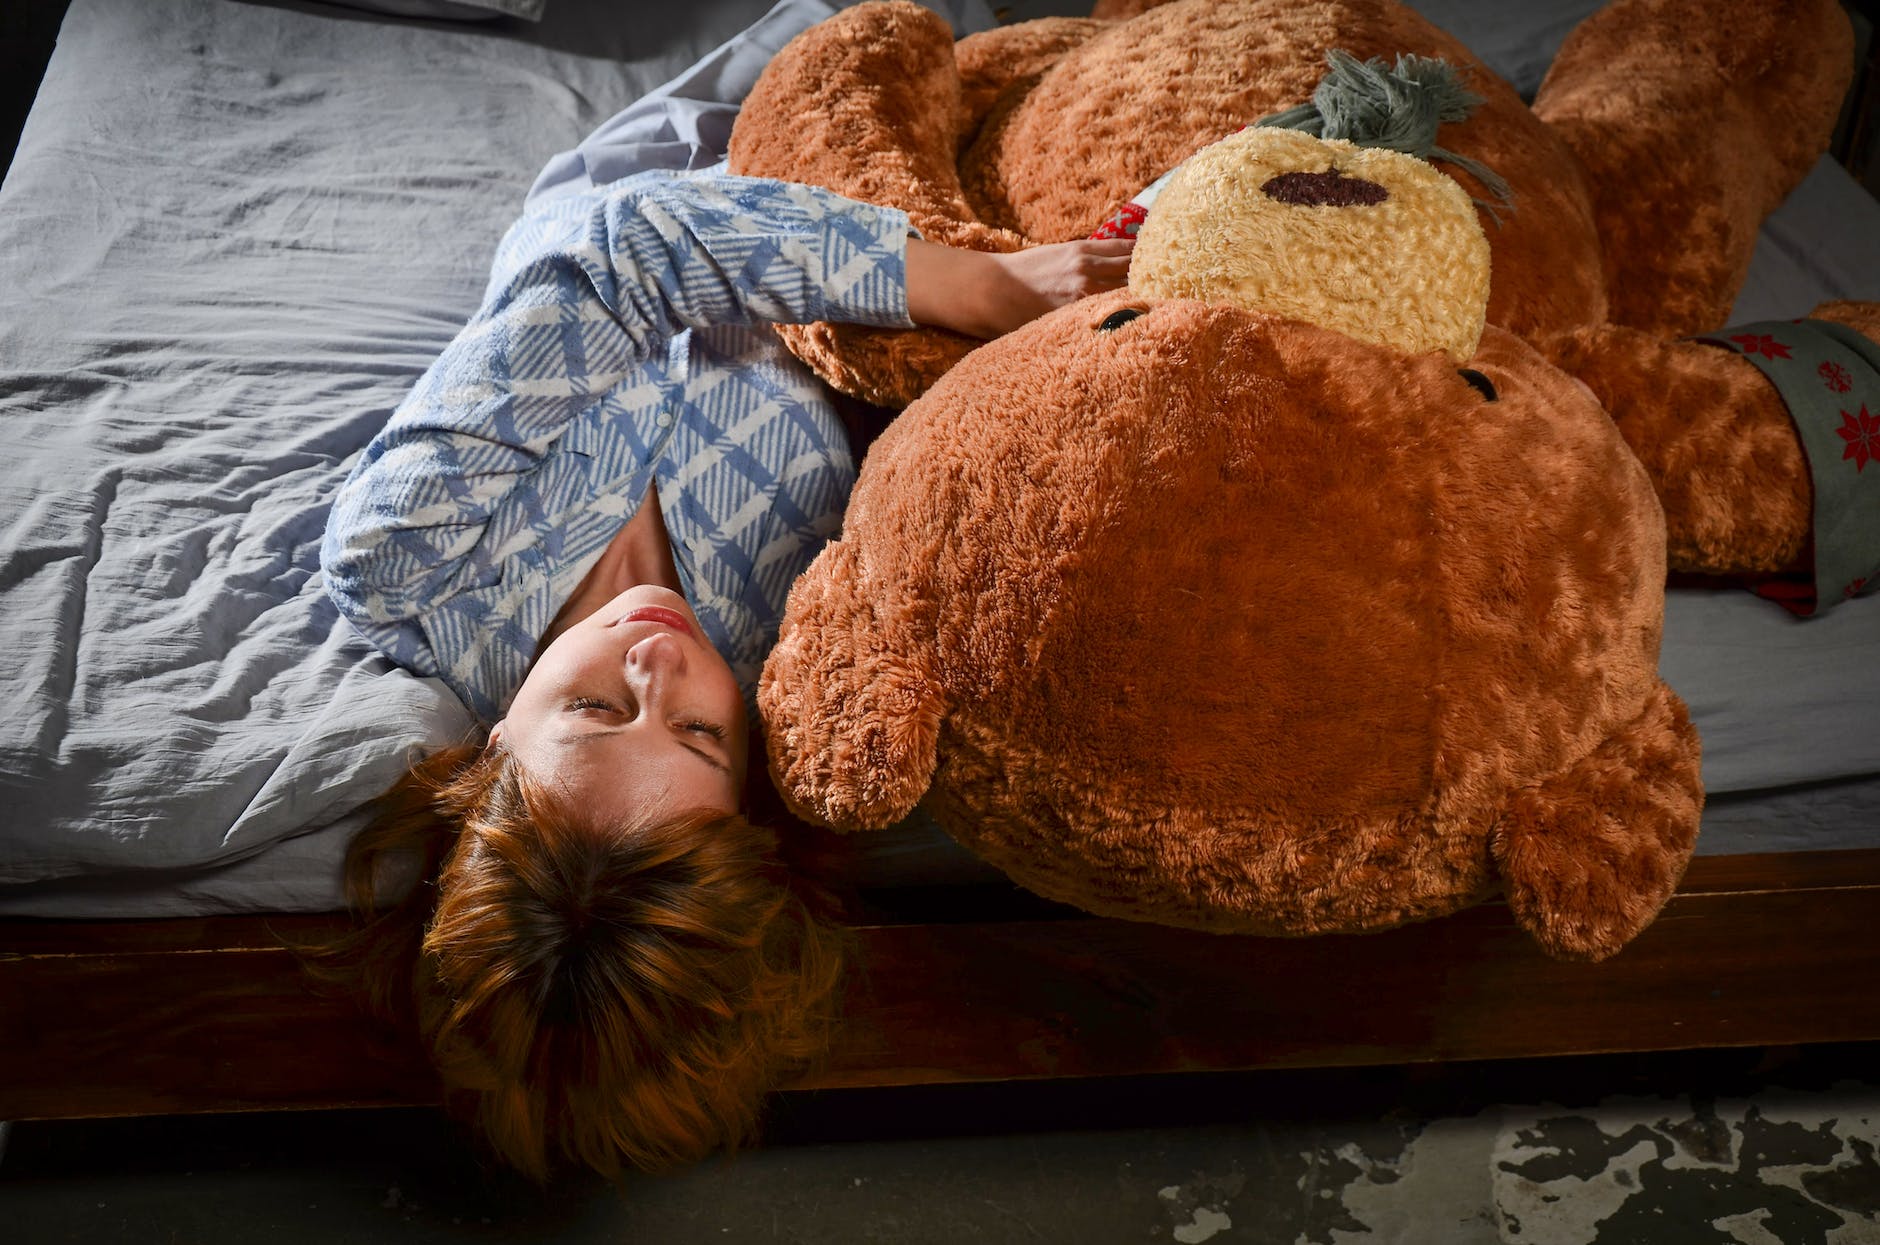 Photo by Victoria Akvarel on <a href="https://www.pexels.com/photo/relaxed-woman-lying-on-bed-with-big-plush-bear-7055799/" rel="nofollow">Pexels.com</a>